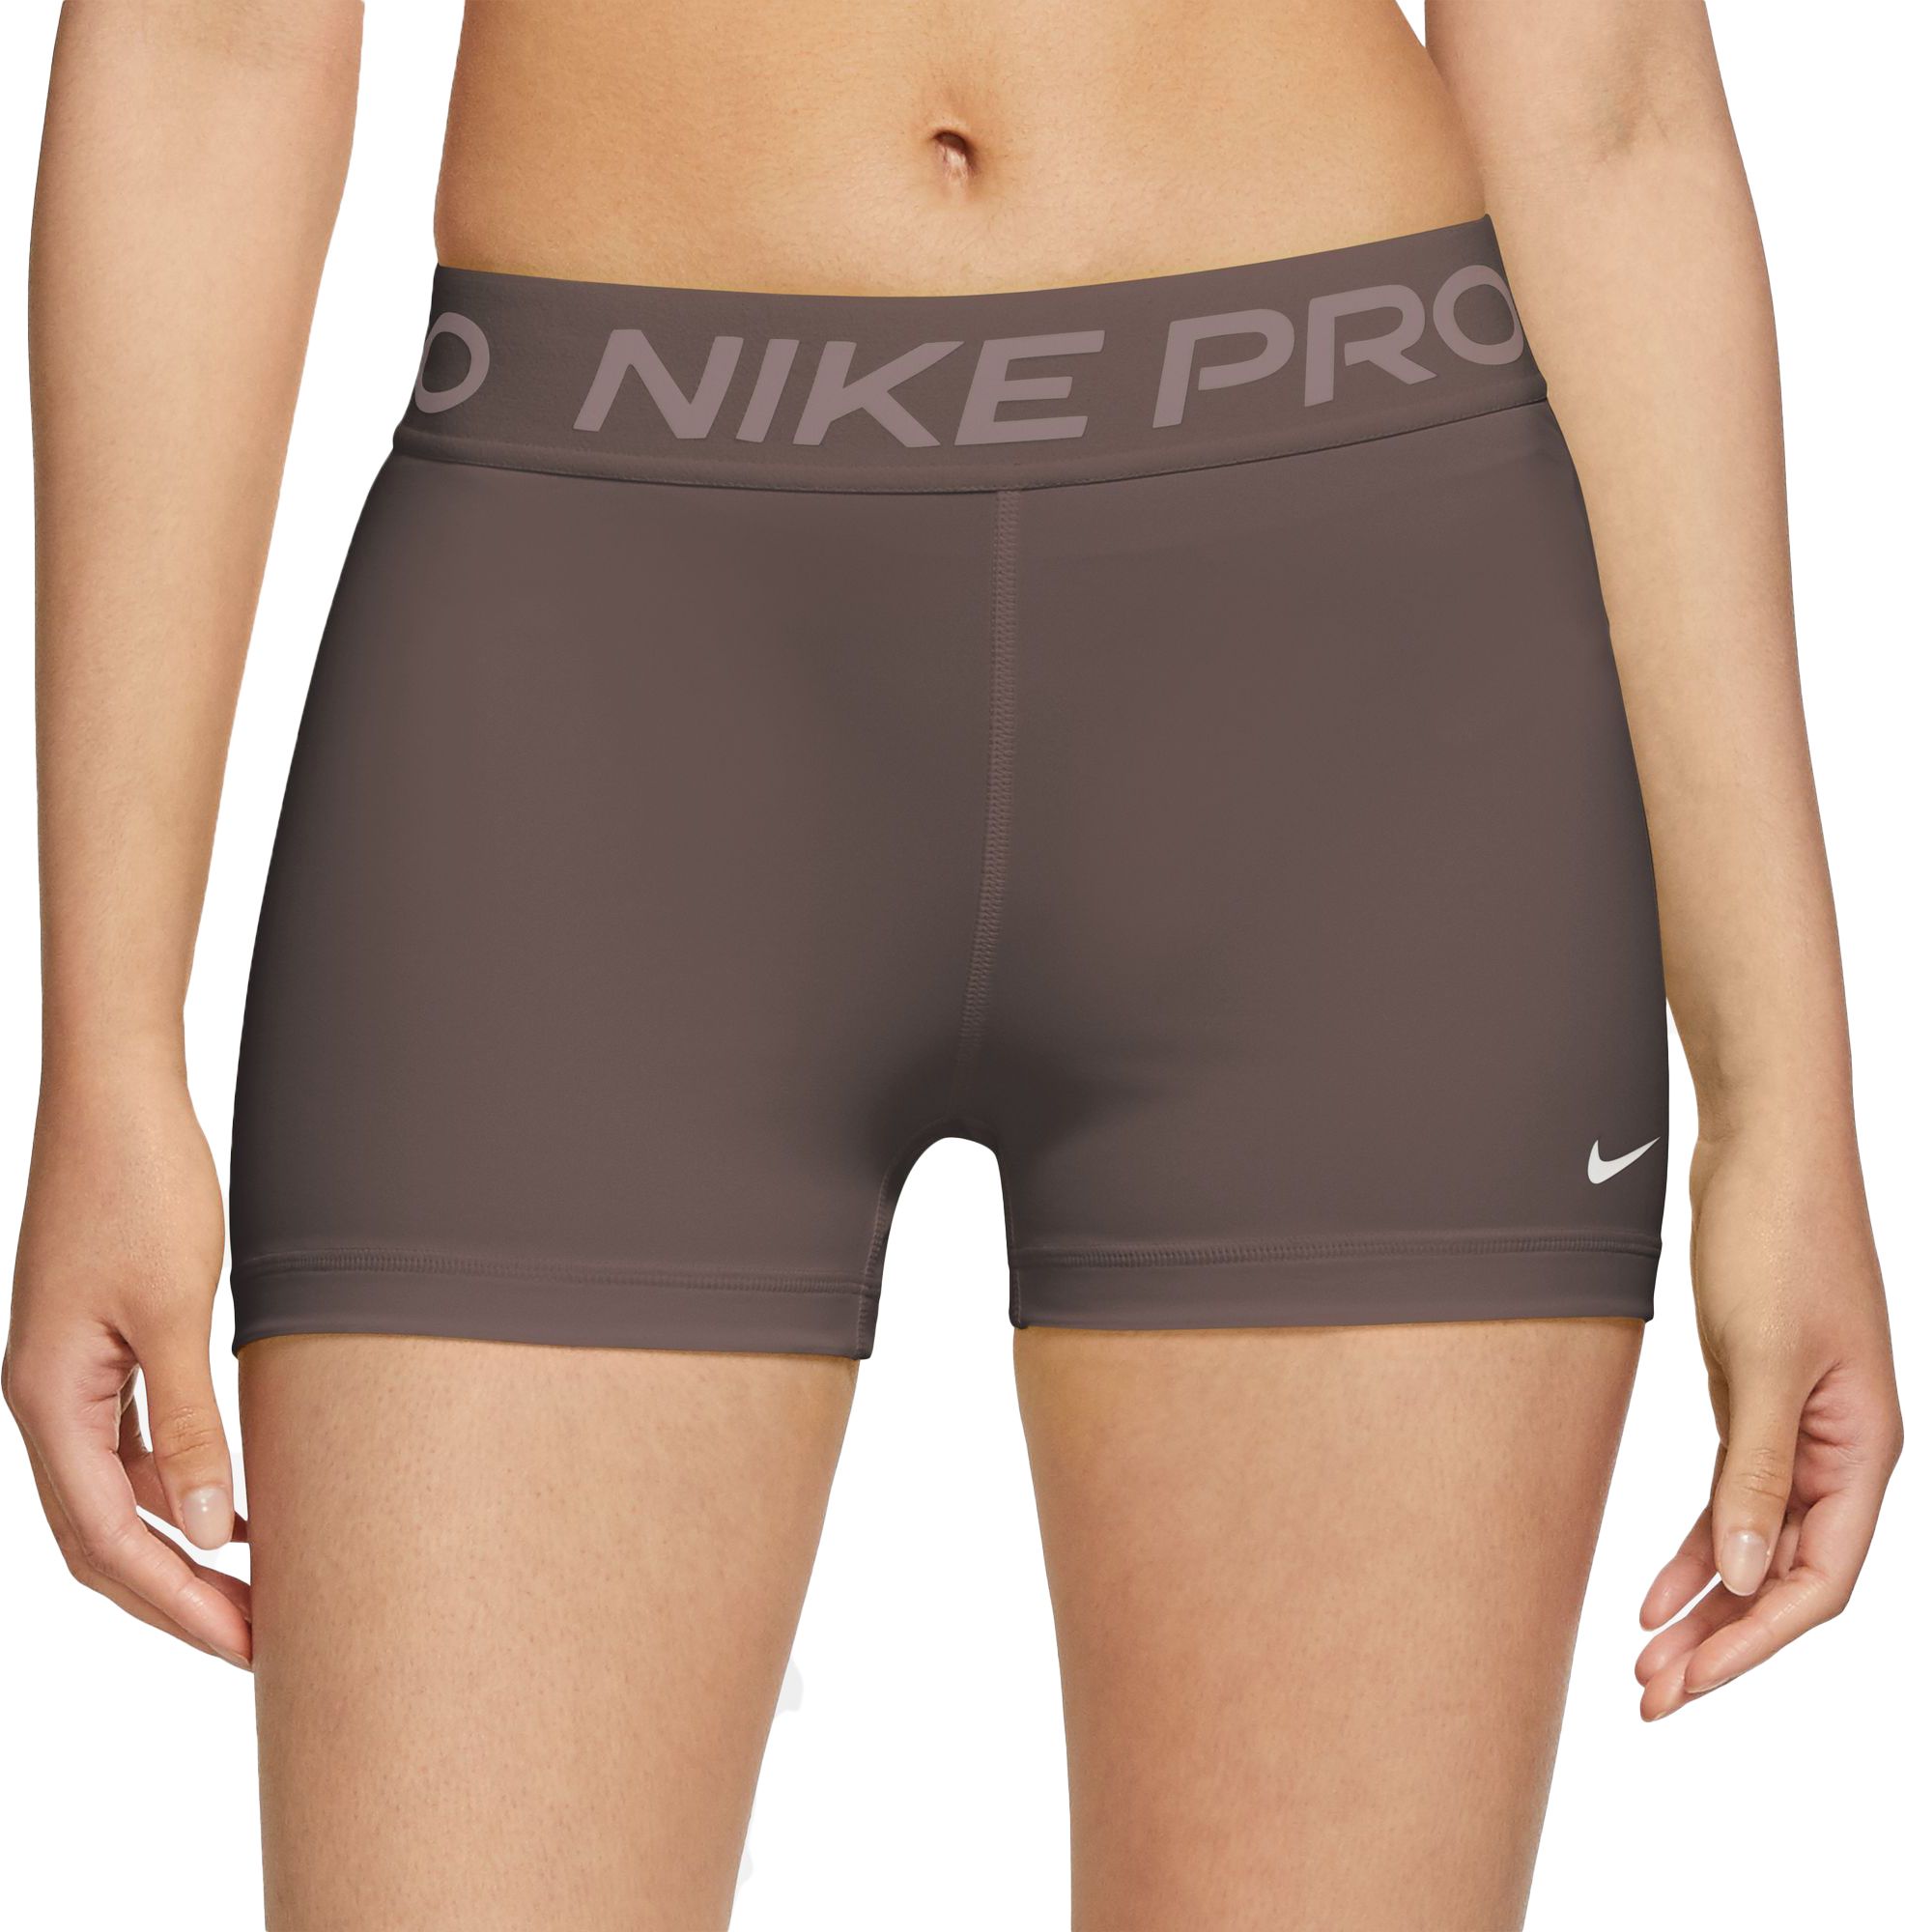 Shop Women's Workout Clothes - Best Price at DICK'S